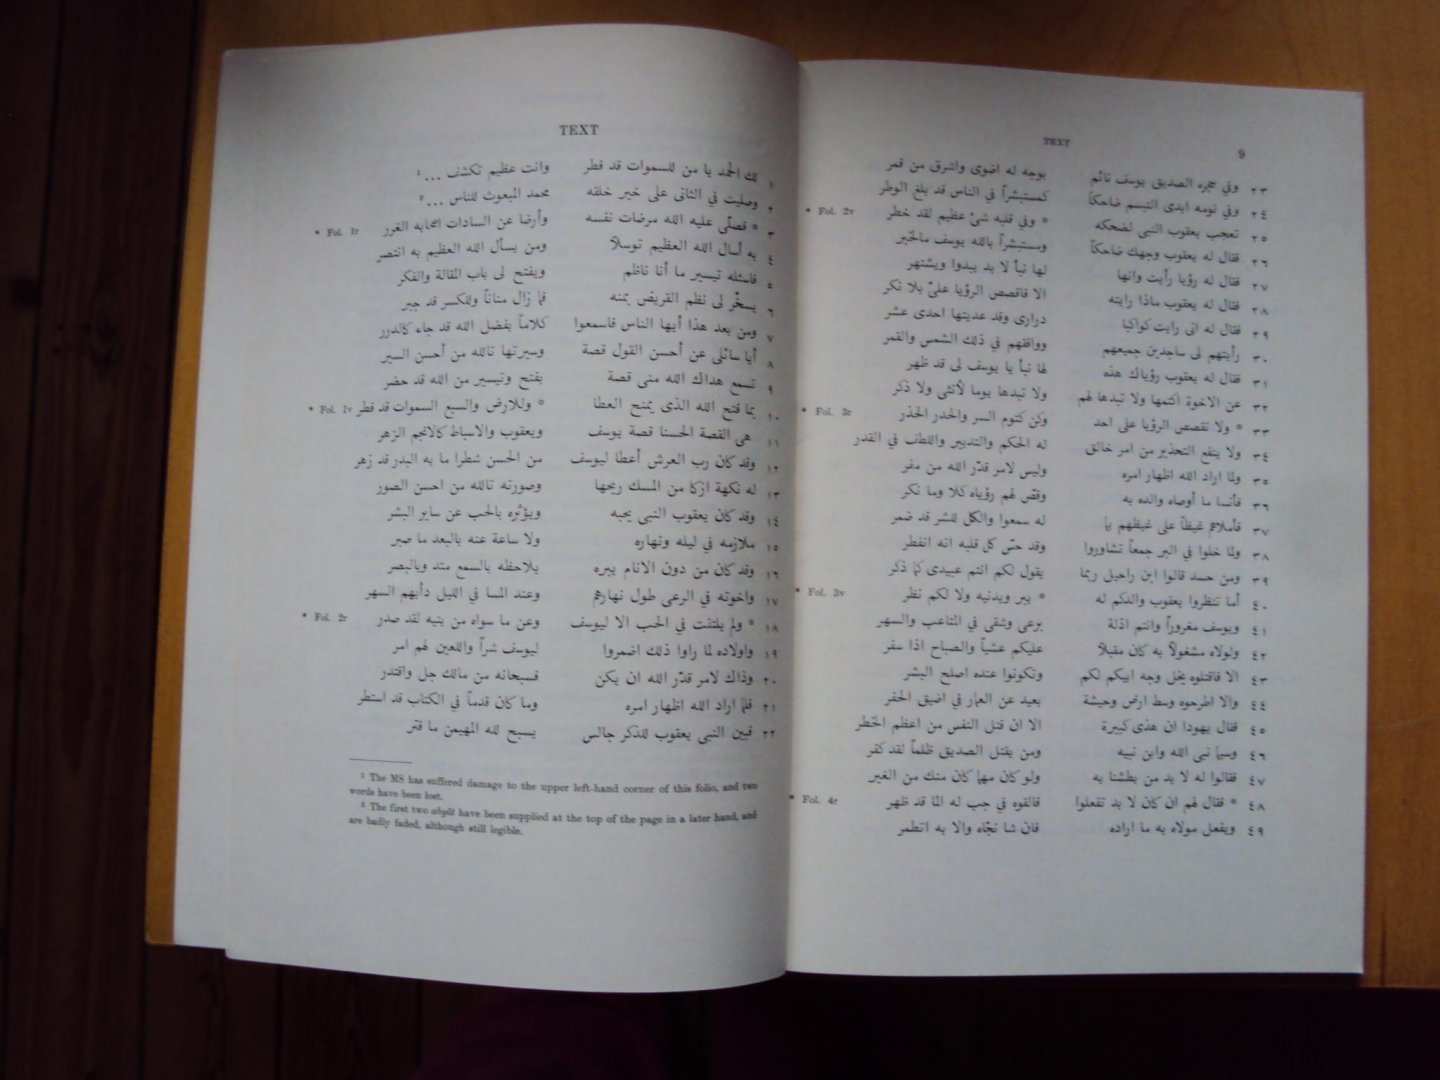 Ebied, R.Y. en M.J.L. Young (eds.) - The Story of Joseph in Arabic Verse. The Leeds Arabic Manuscript 347 (Supplement III to the Annual of Leeds University Oriental Society)